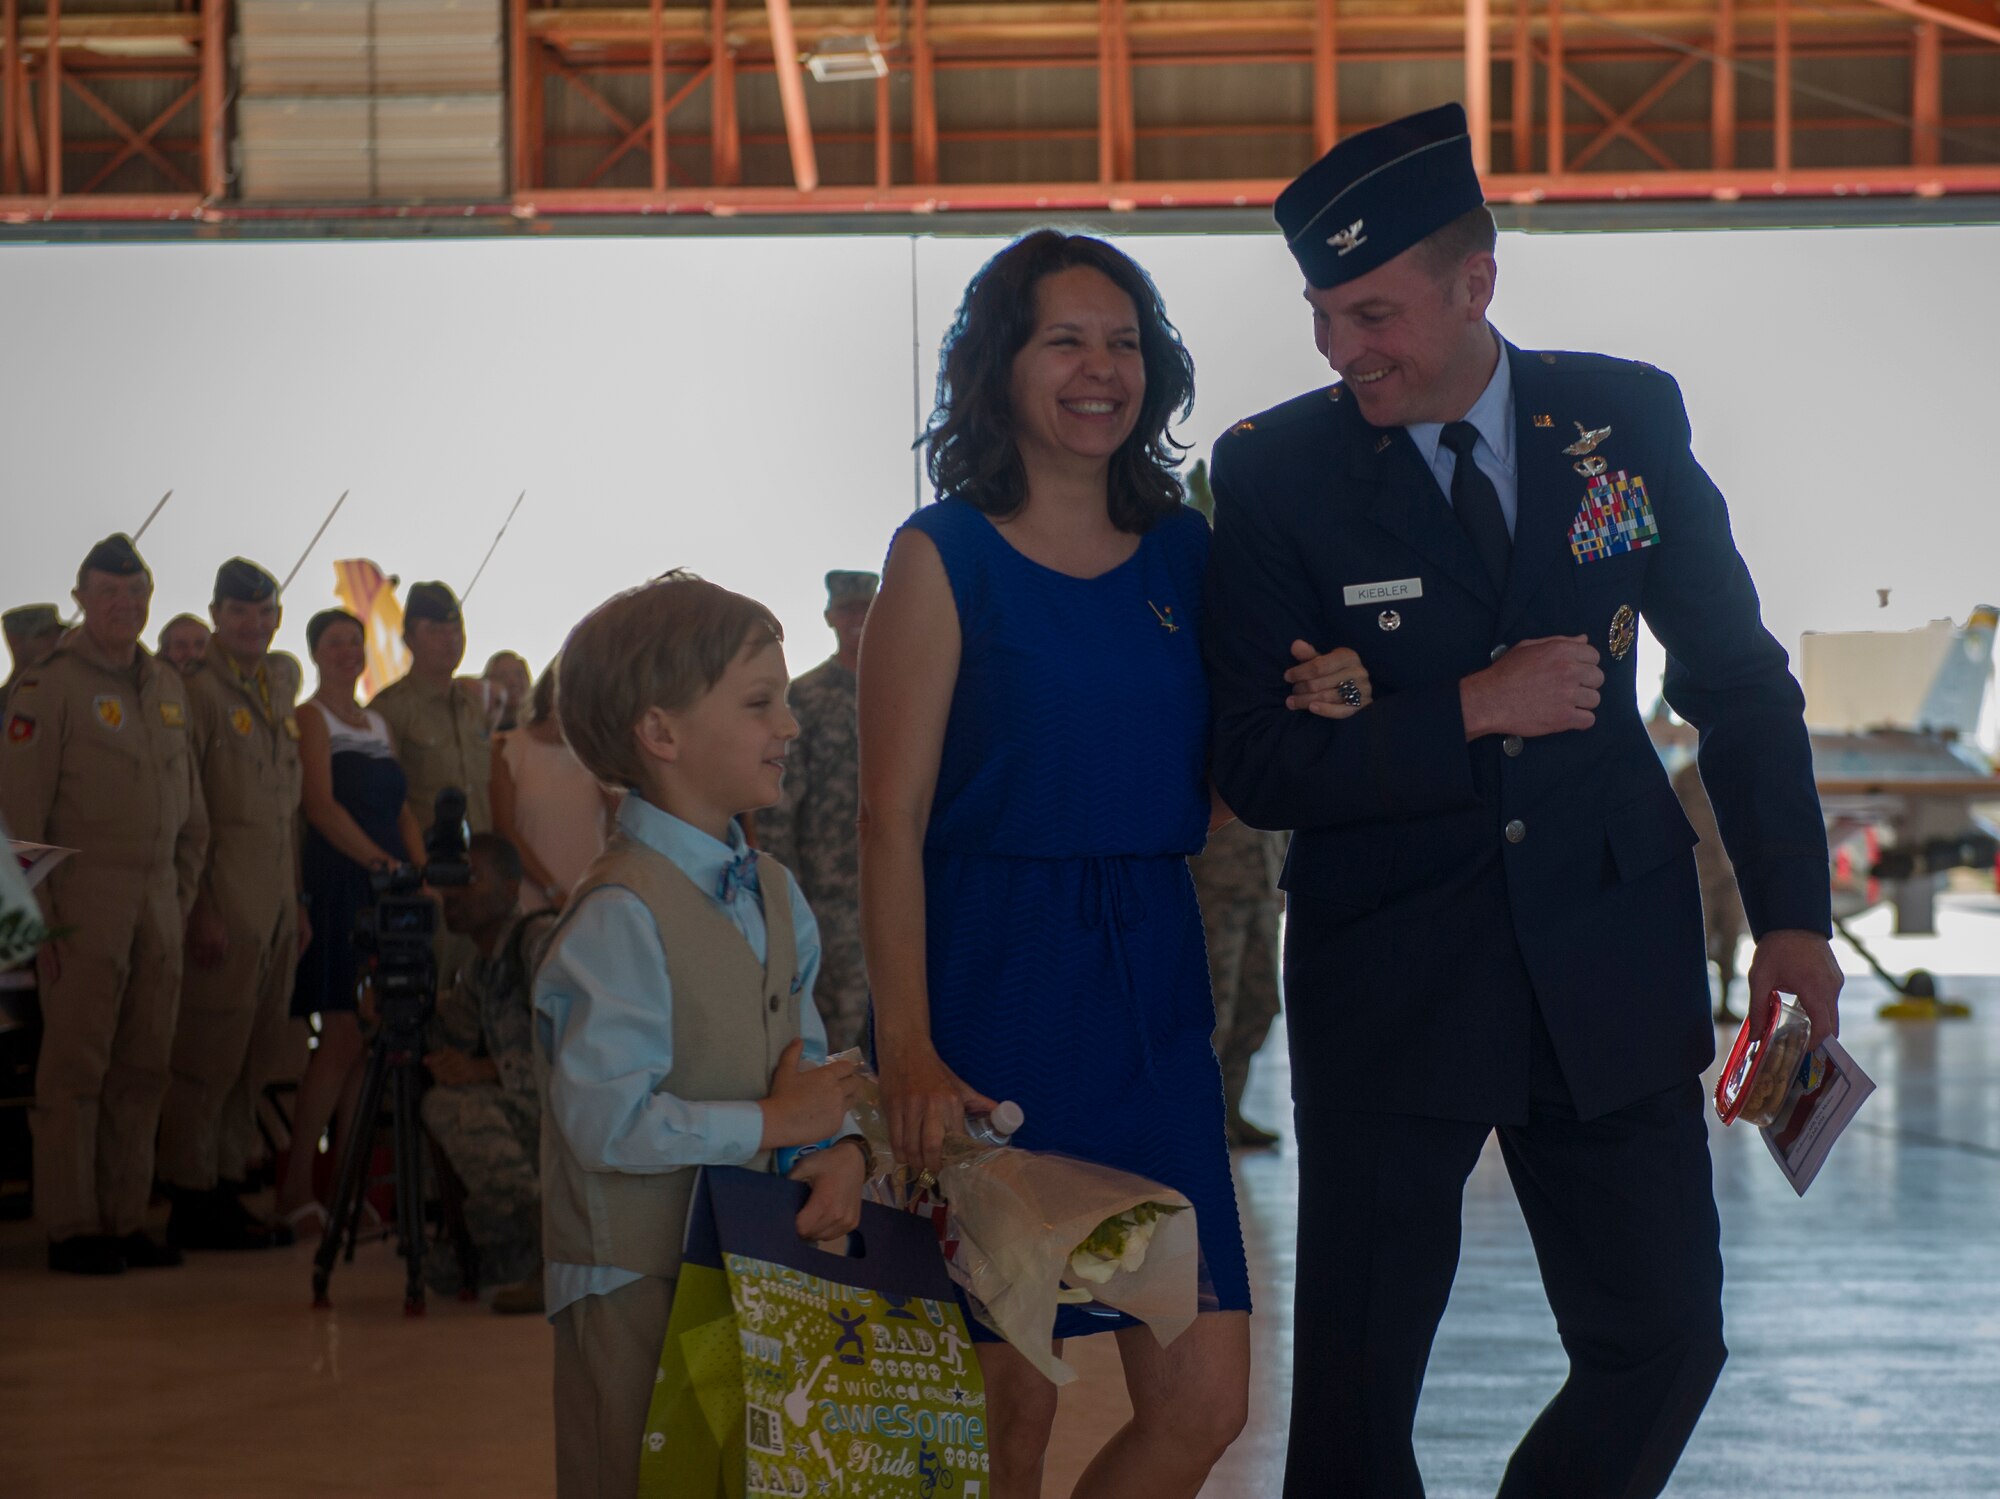 Colonel Robert Kiebler, 49th Wing commander, and his family depart hangar 500 after his assumption of command ceremony at Holloman Air Force Base, N.M., July 18. An assumption or change of command is a military tradition that represents a formal transfer of authority and responsibility for a unit from one commanding officer to another. (U.S. Air Force photo by Airman 1st Class Aaron Montoya / Released)